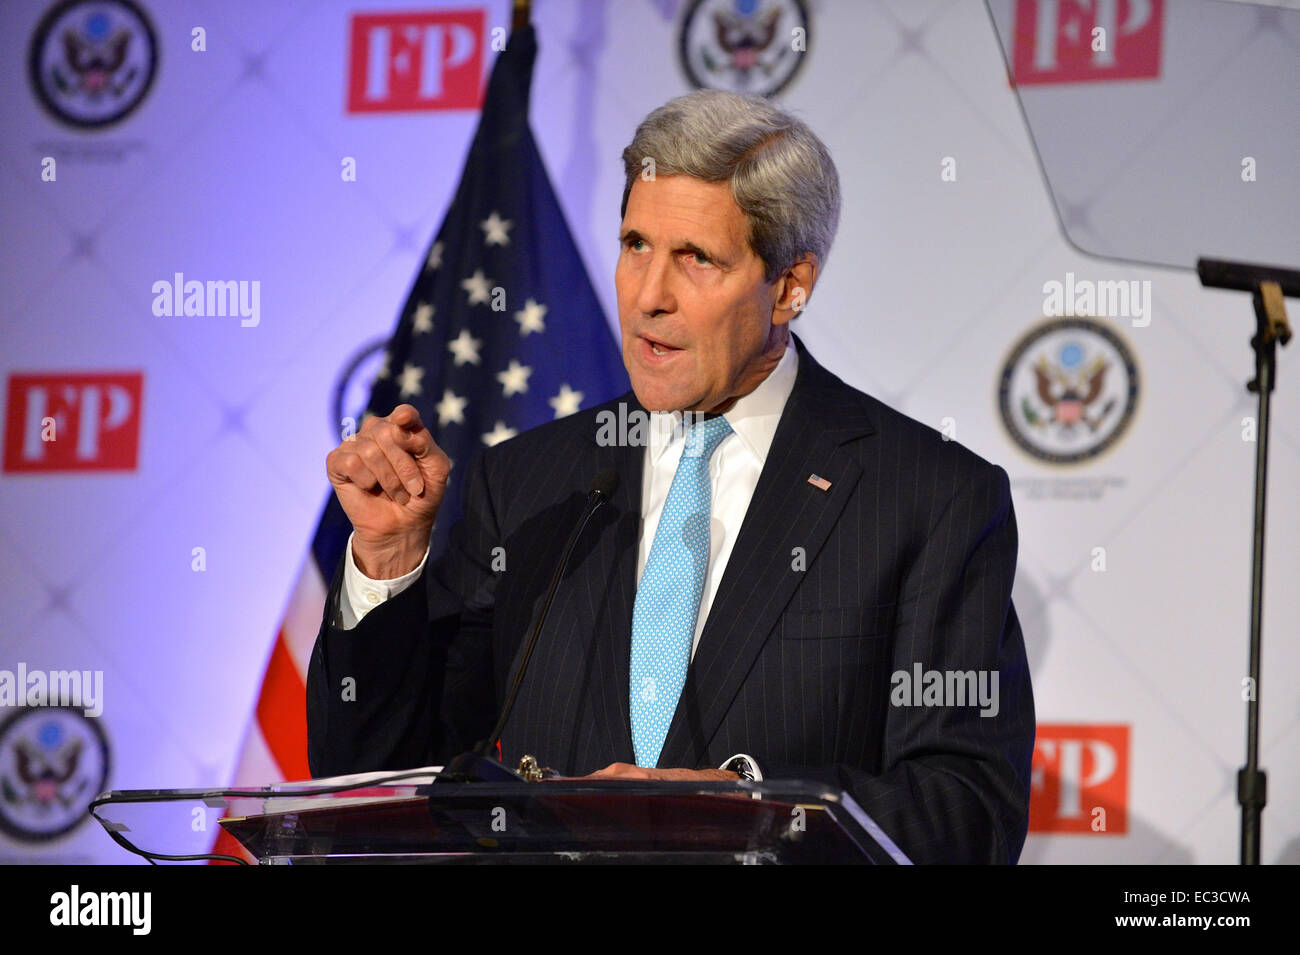 U.S. Secretary of State John Kerry speaks at the 2014 Transformational Trends Forum, co-hosted by the U.S. Department of State and Foreign Policy, in Washington, D.C., on November 17, 2014. Stock Photo